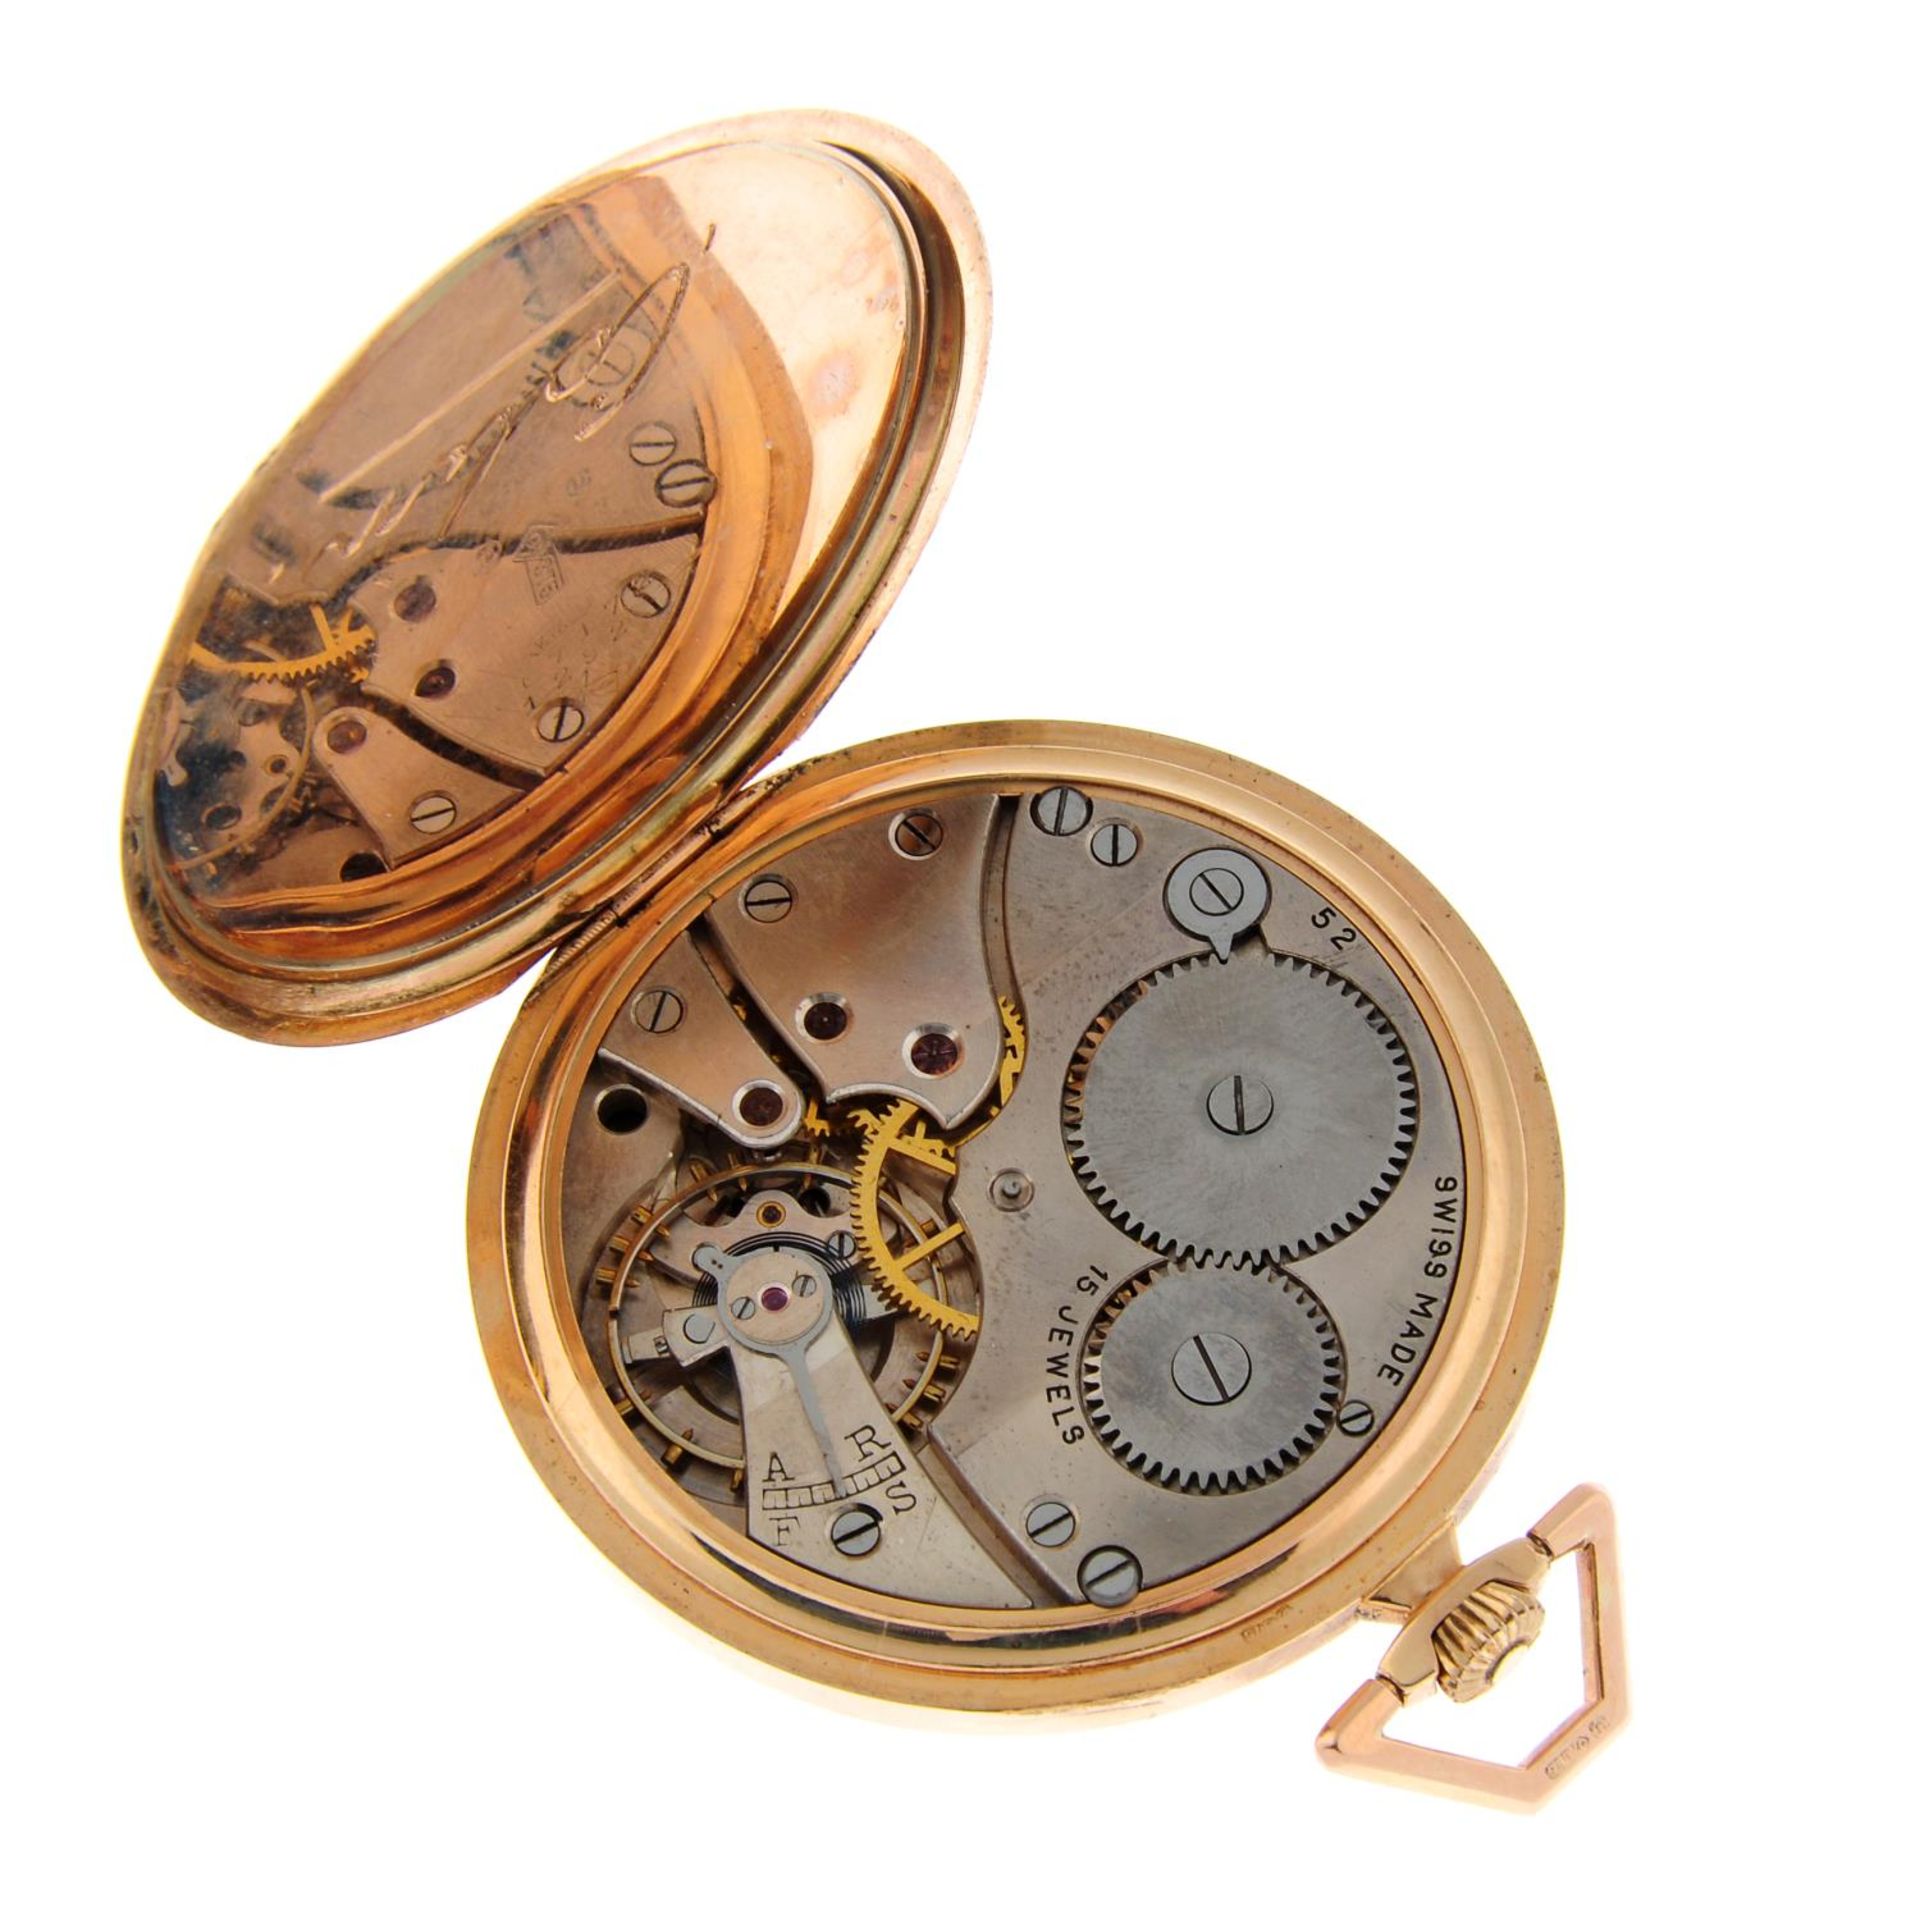 An open face pocket watch by E. - Image 3 of 3